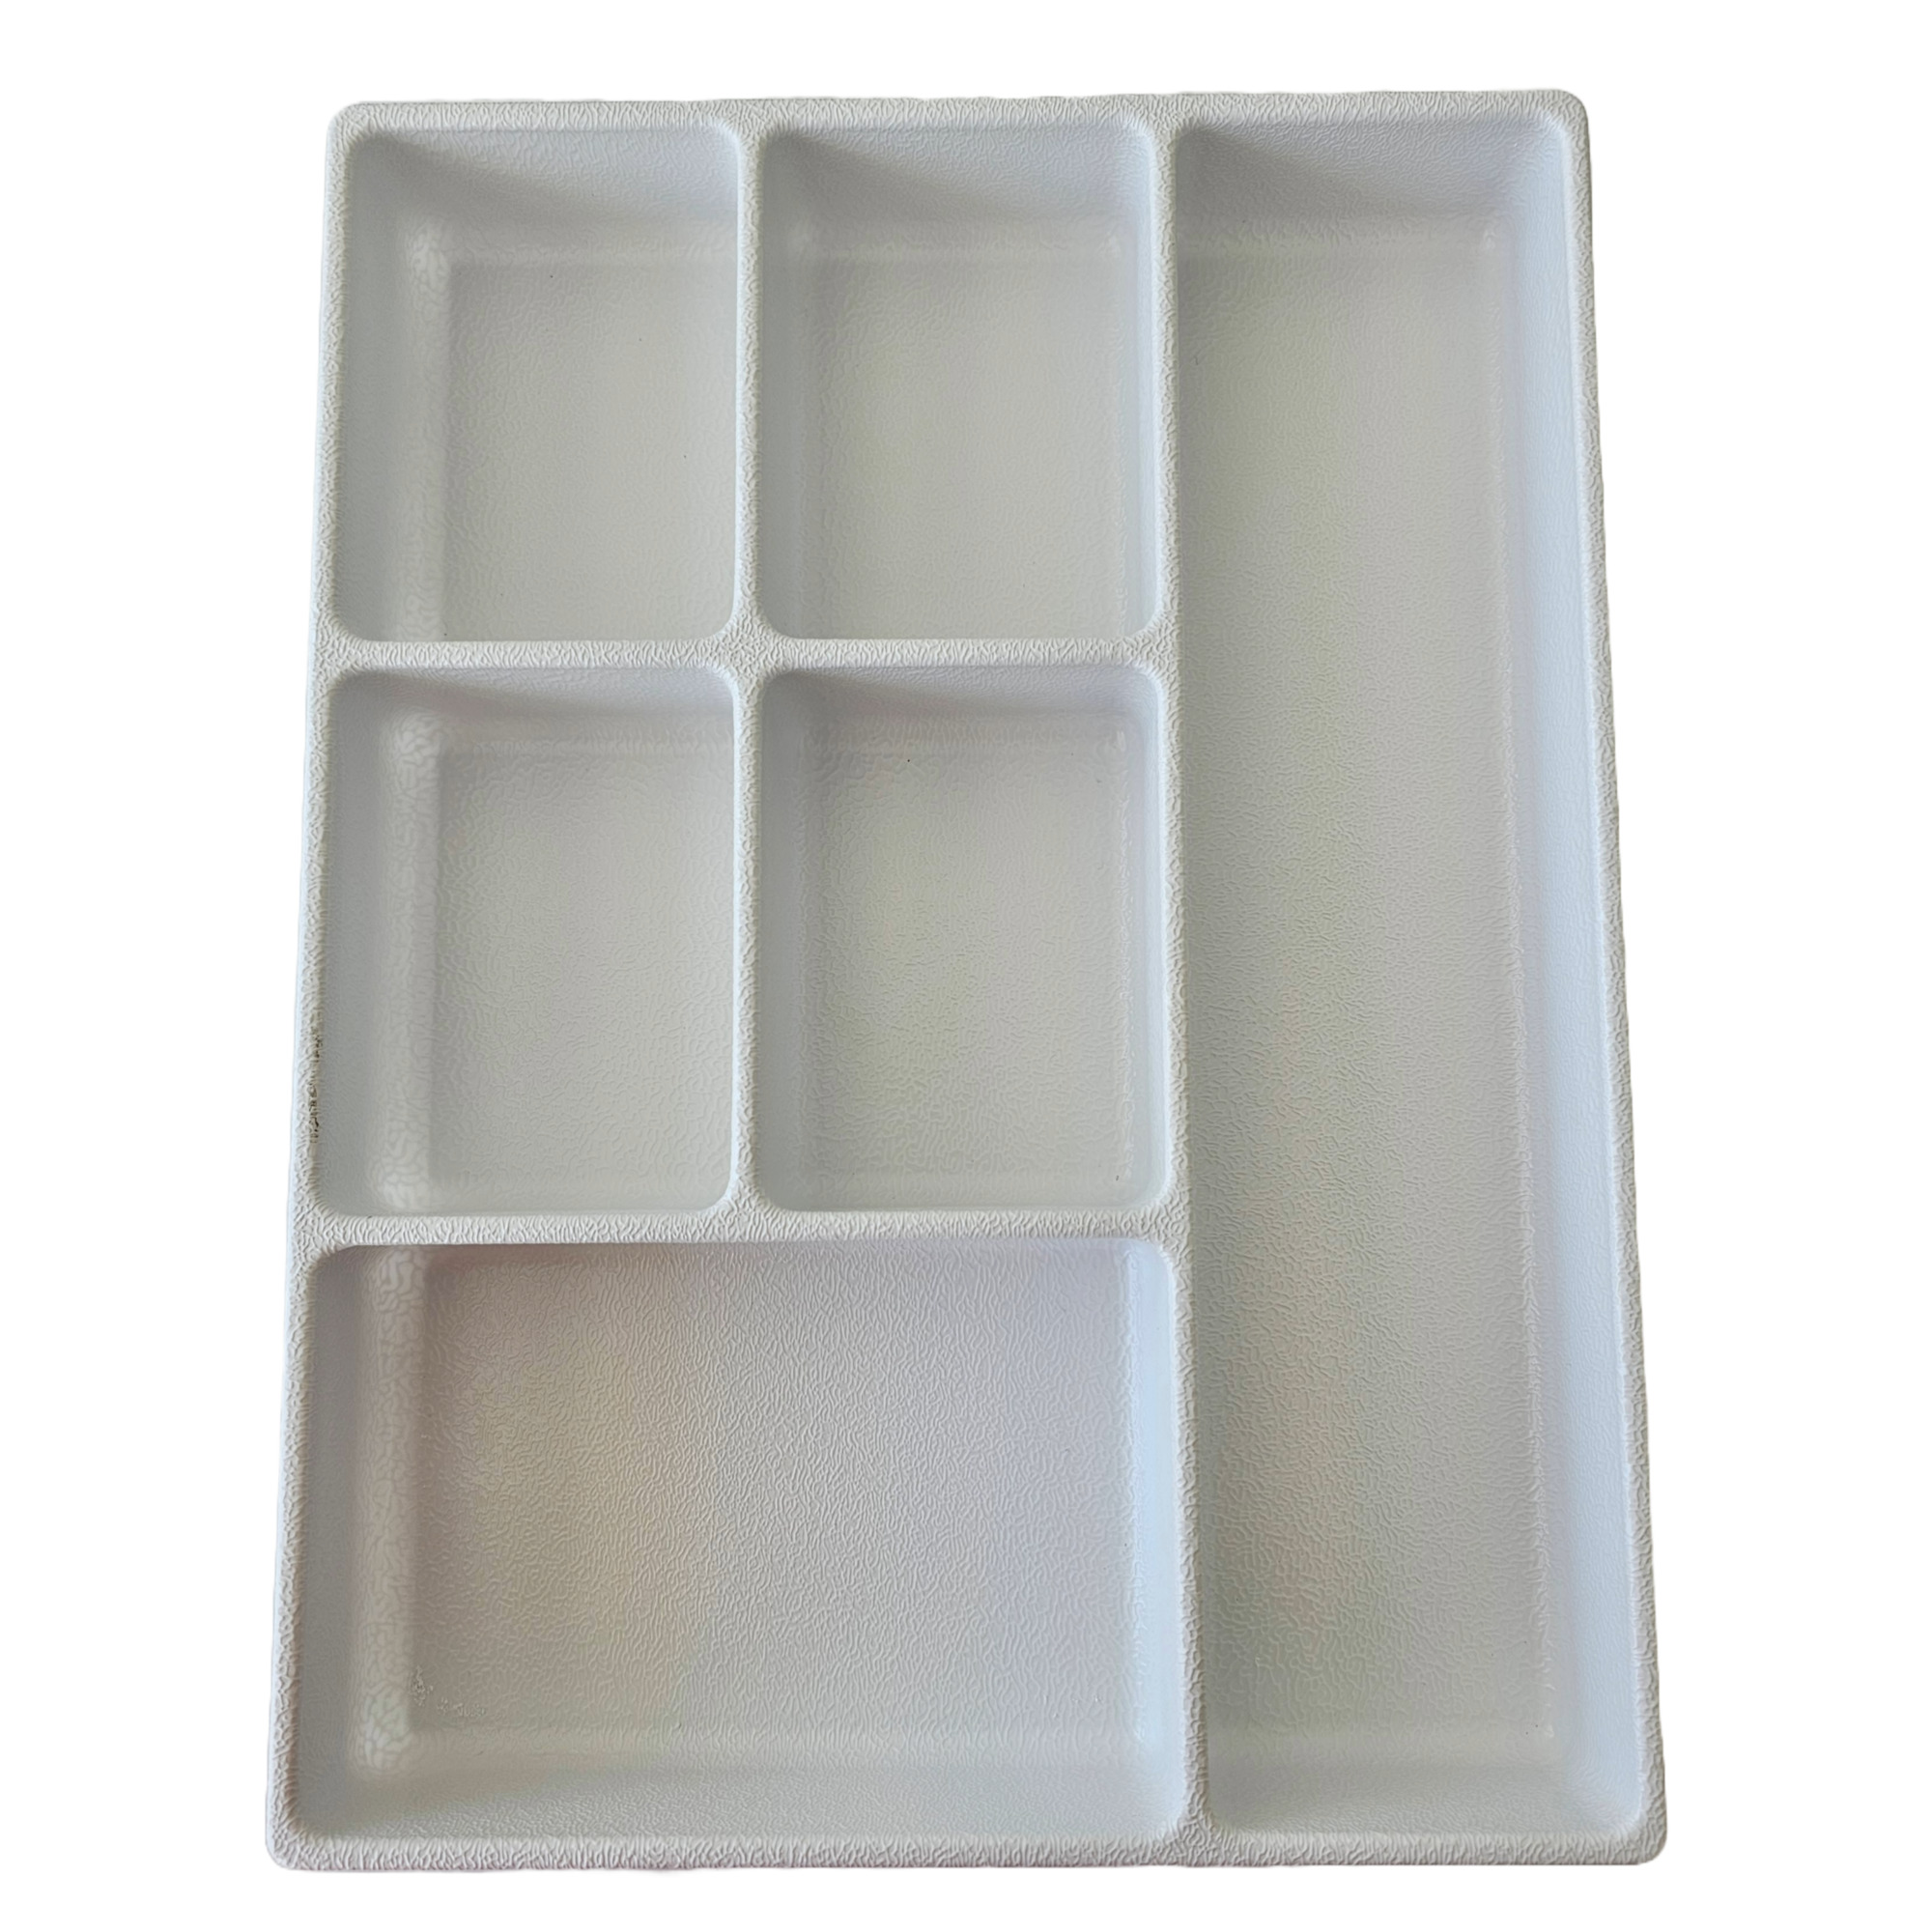 Viper Tool Storage, 6-Compartment Small Parts Organizer Tray, White, Width 14.5 in, Height 1.8 in, Color White, Model VSDOWH